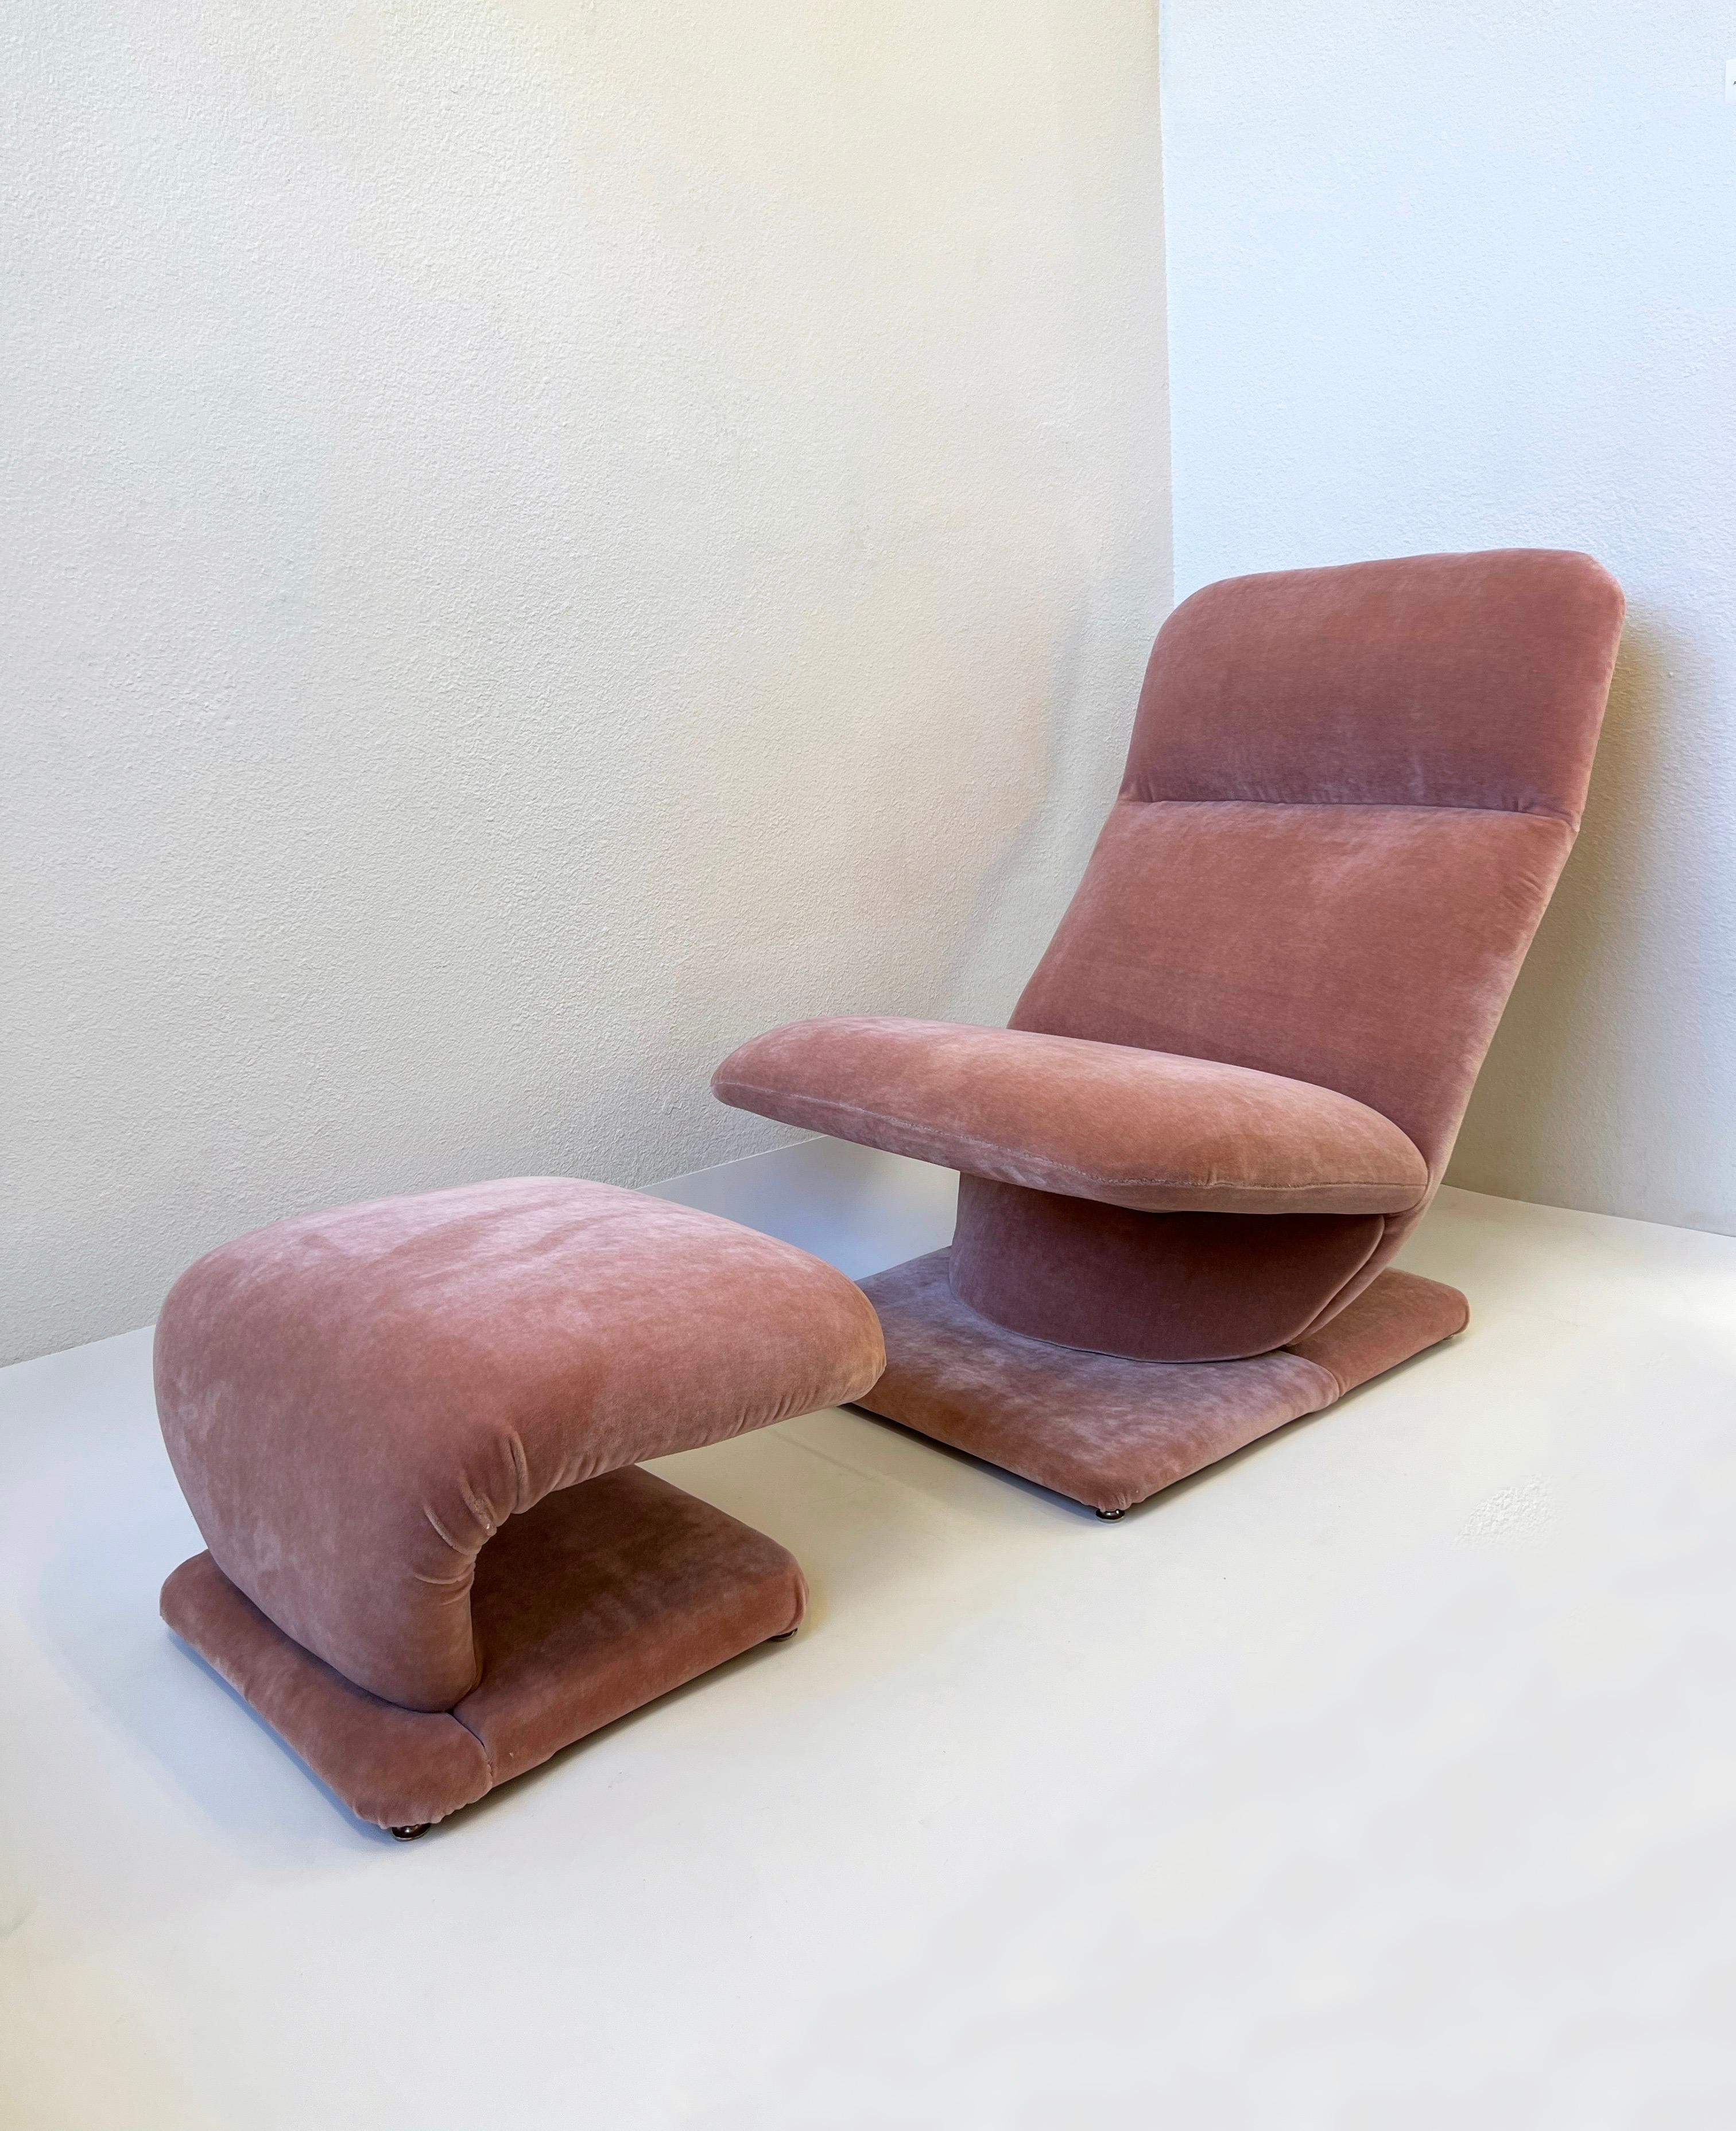 A beautiful 1980’s pink soft mohair lounge chair and ottoman by Design Institute of America.
The chair rocks, newly recovered.
Retains DIA label. 

Measurements: 
chair- 36” high, 37” deep, 29” wide, 17” seat.
ottoman- 13” high, 20.5” deep,